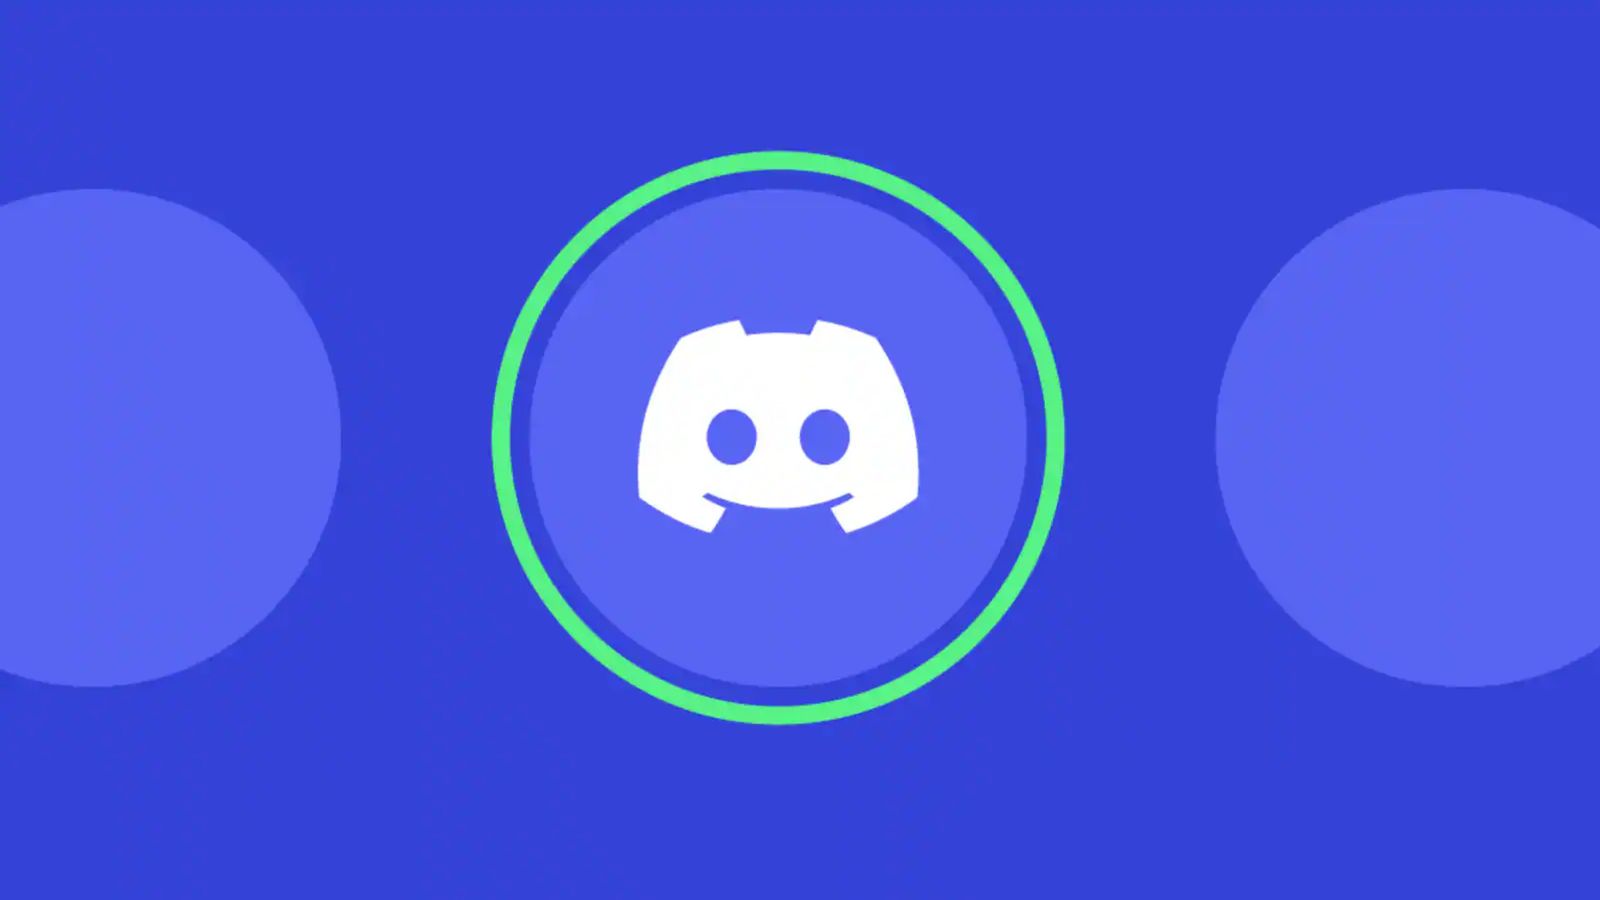 Keybinds - Discord icon with a green circle, indicating that someone is speaking.